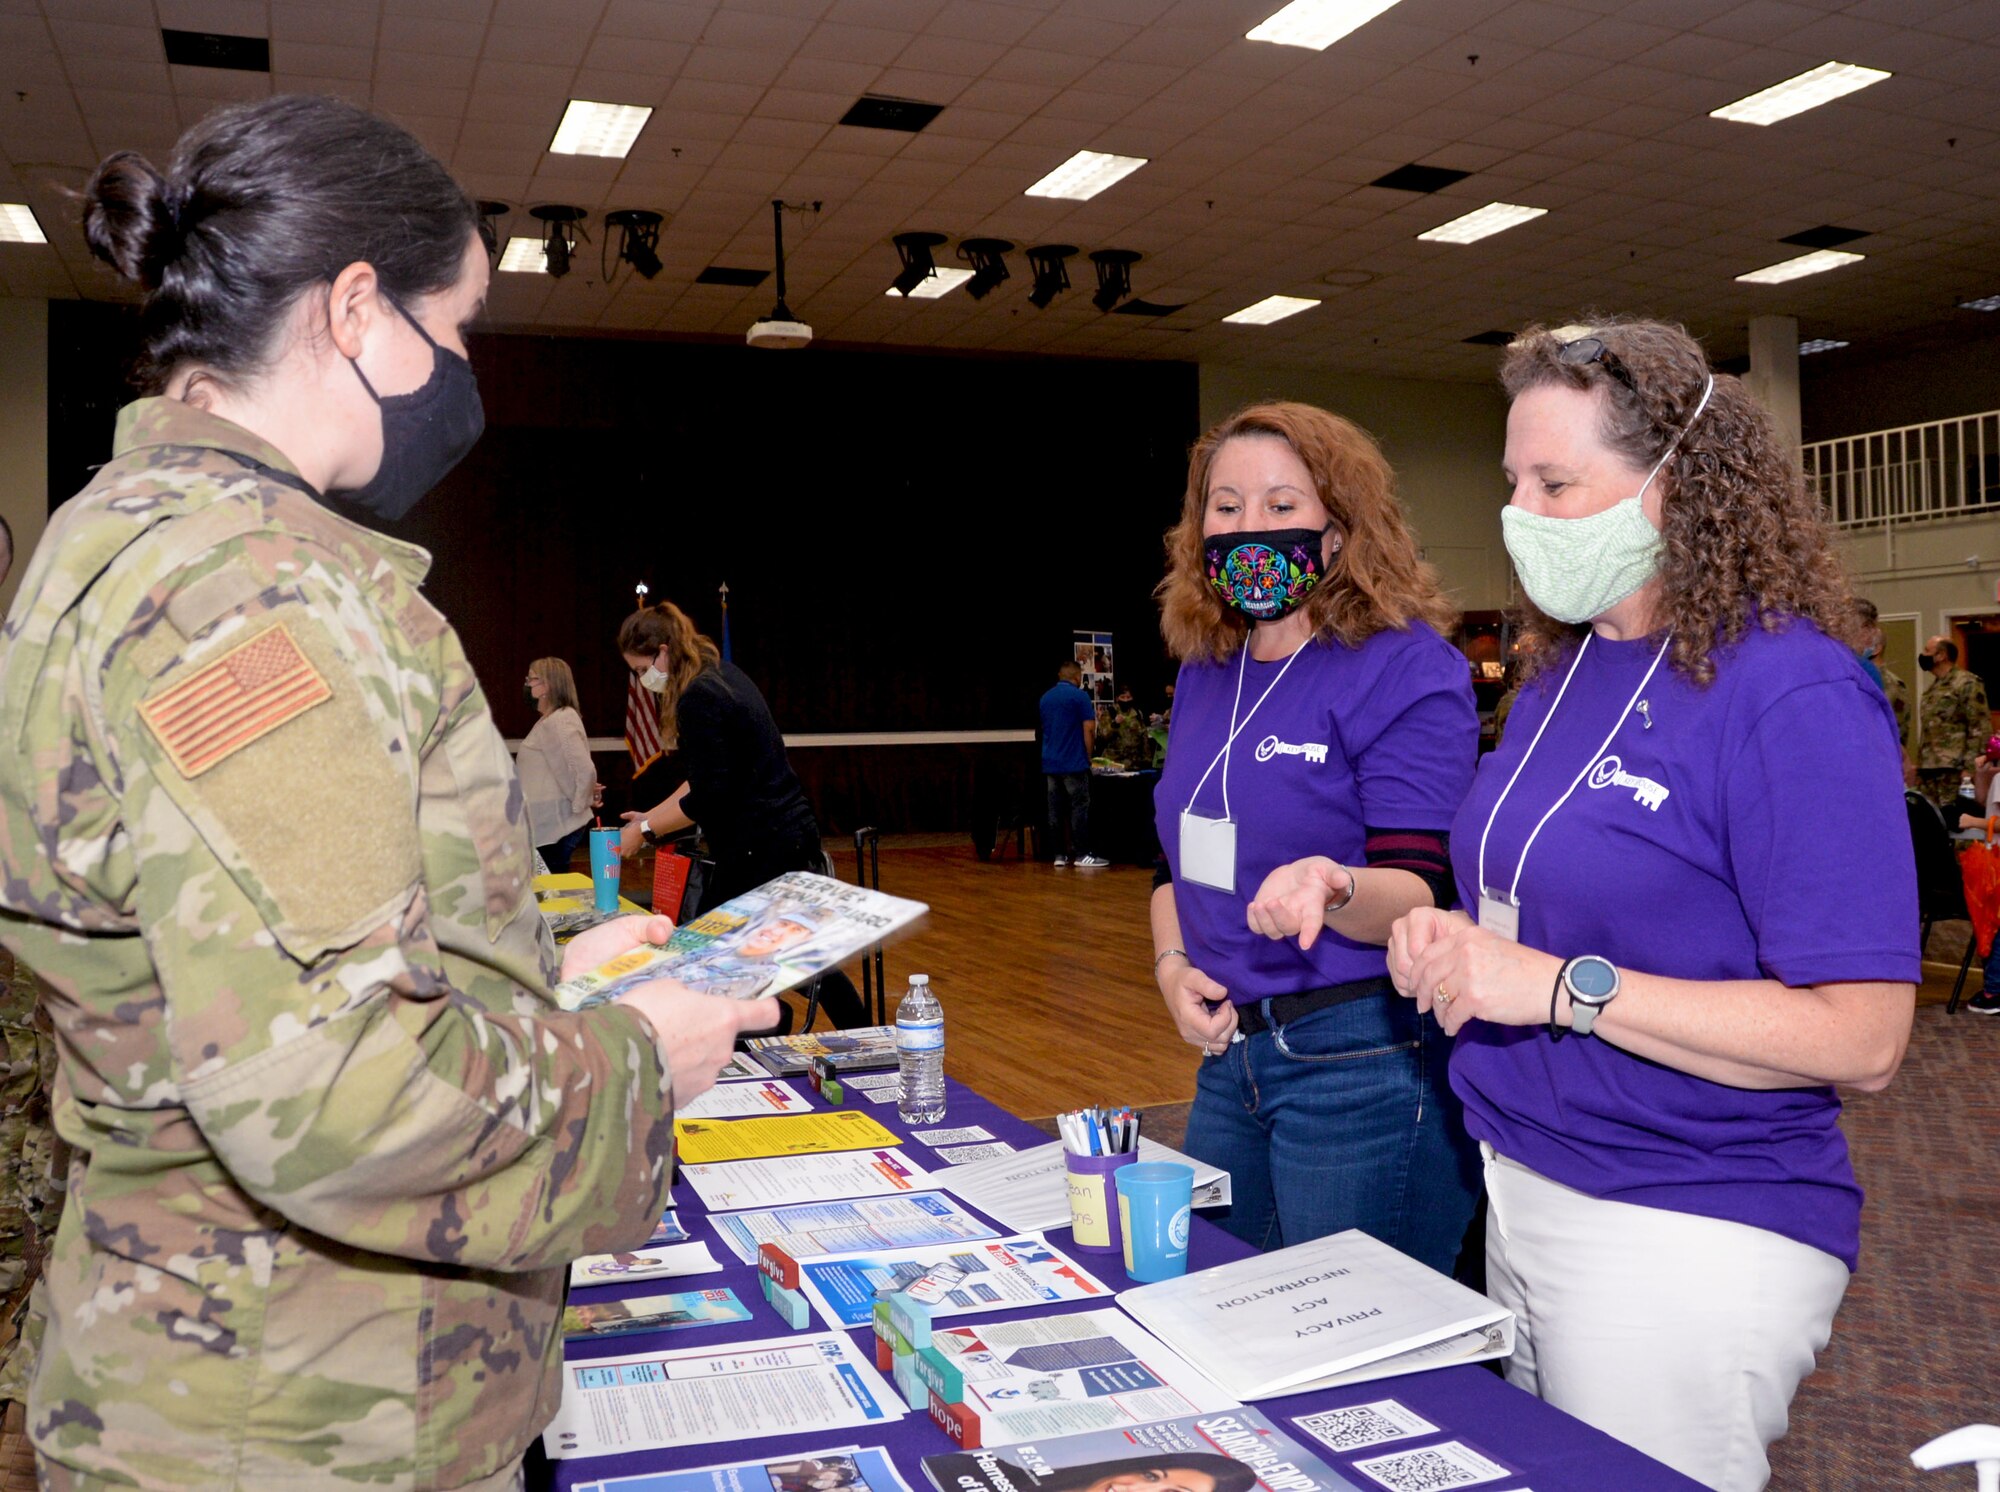 Maj. Kathleen Ball, 854th Combat Operations Squadron deputy division chief of the Intelligence, Surveillance and Reconnaissance Division, visits with 960th Cyberspace Wing key spouses, K.C. Erredge and Johanna Trelles, during the Mental Health and Resiliency Fair at Joint Base San Antonio-Lackland, Texas, May 1, 2021. (U.S. Air Force photo by Tech. Sgt. Samantha Mathison)